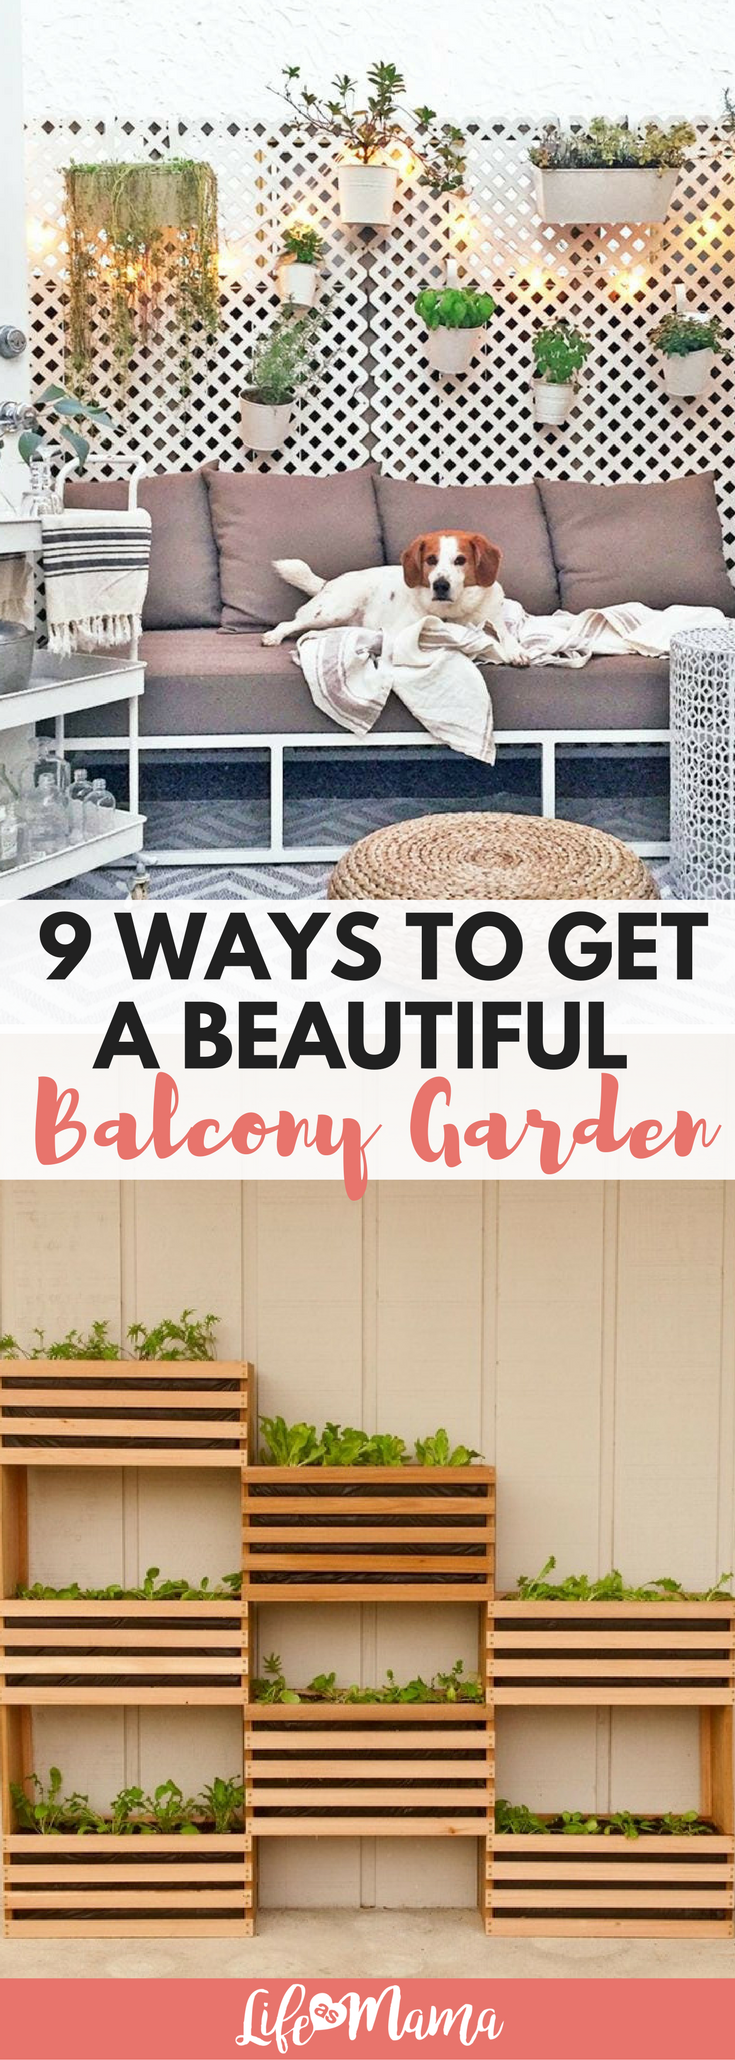 9 Ways To Get A Beautiful Balcony Garden - Page 3 of 3 -   23 beautiful balcony garden
 ideas